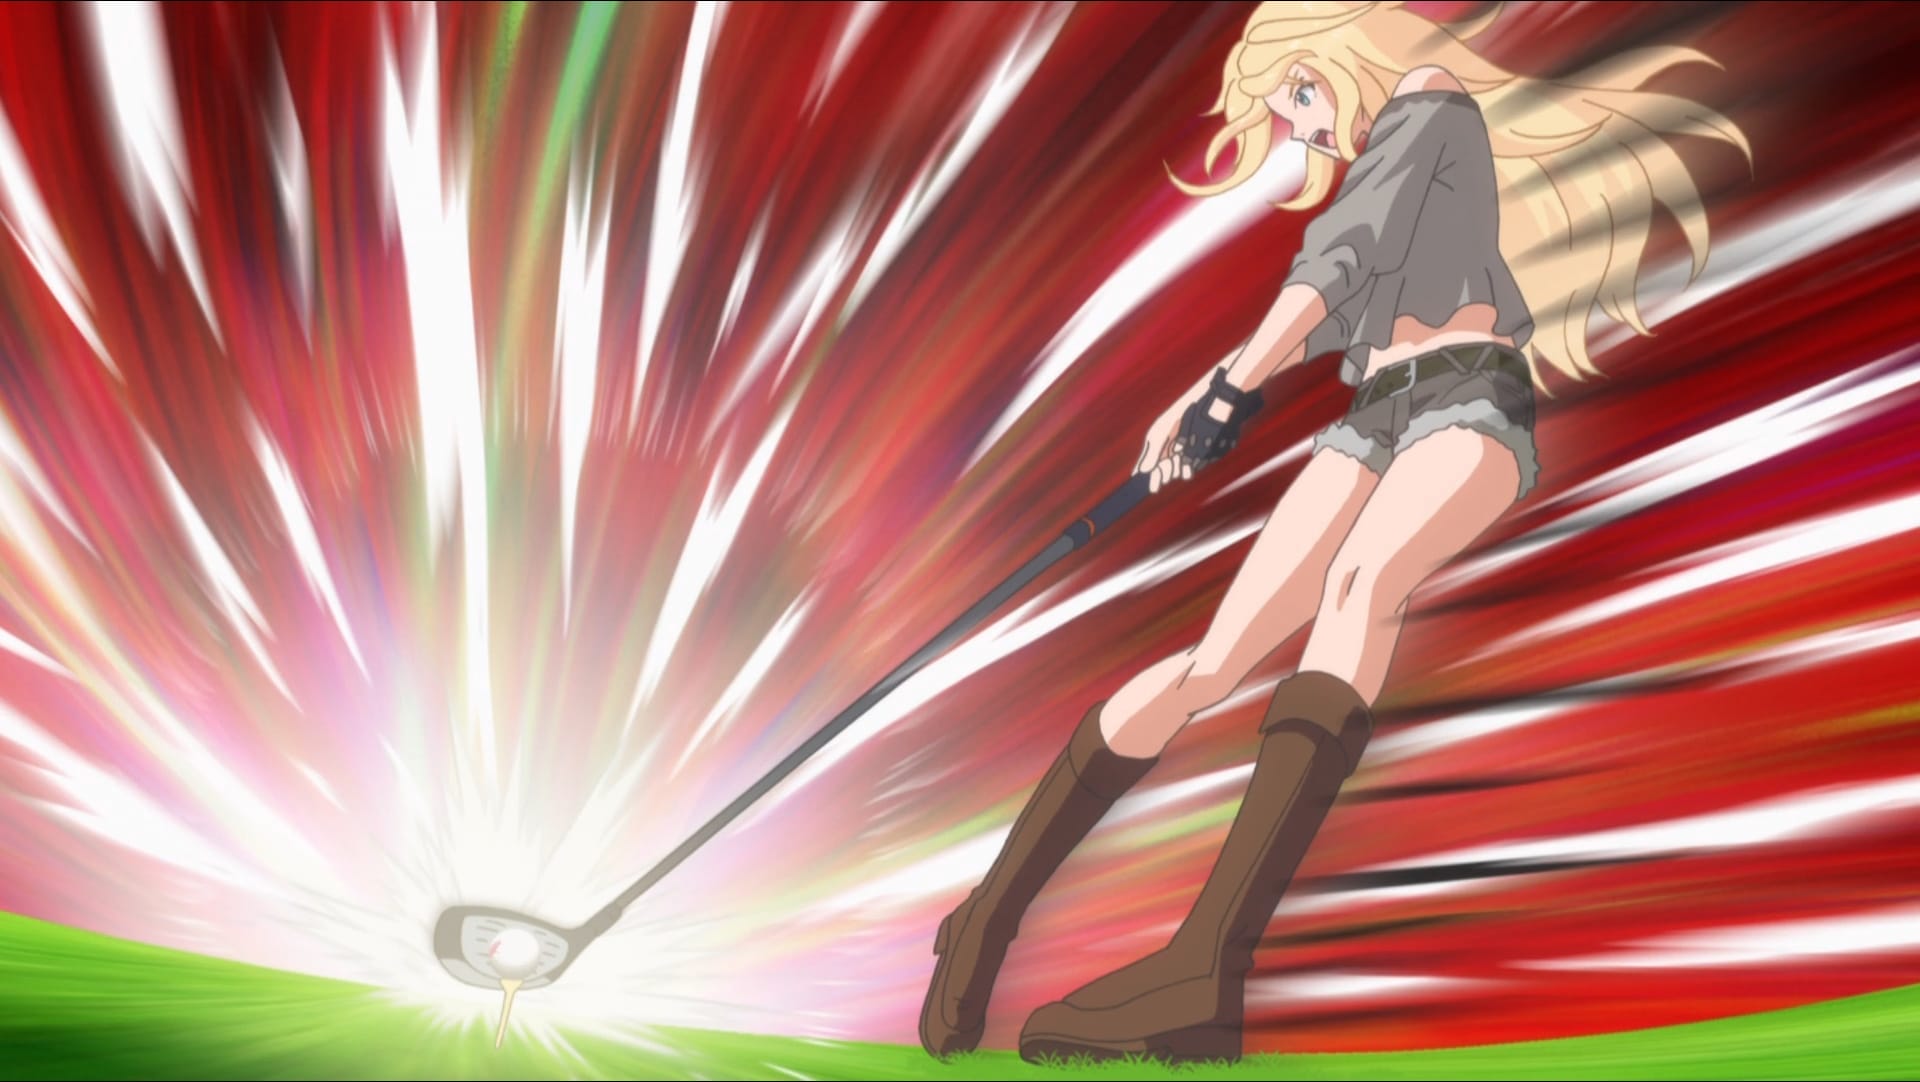 Screenshot from Birdie Wing that depicts lead character Eve hitting a golf ball against a red starfire background